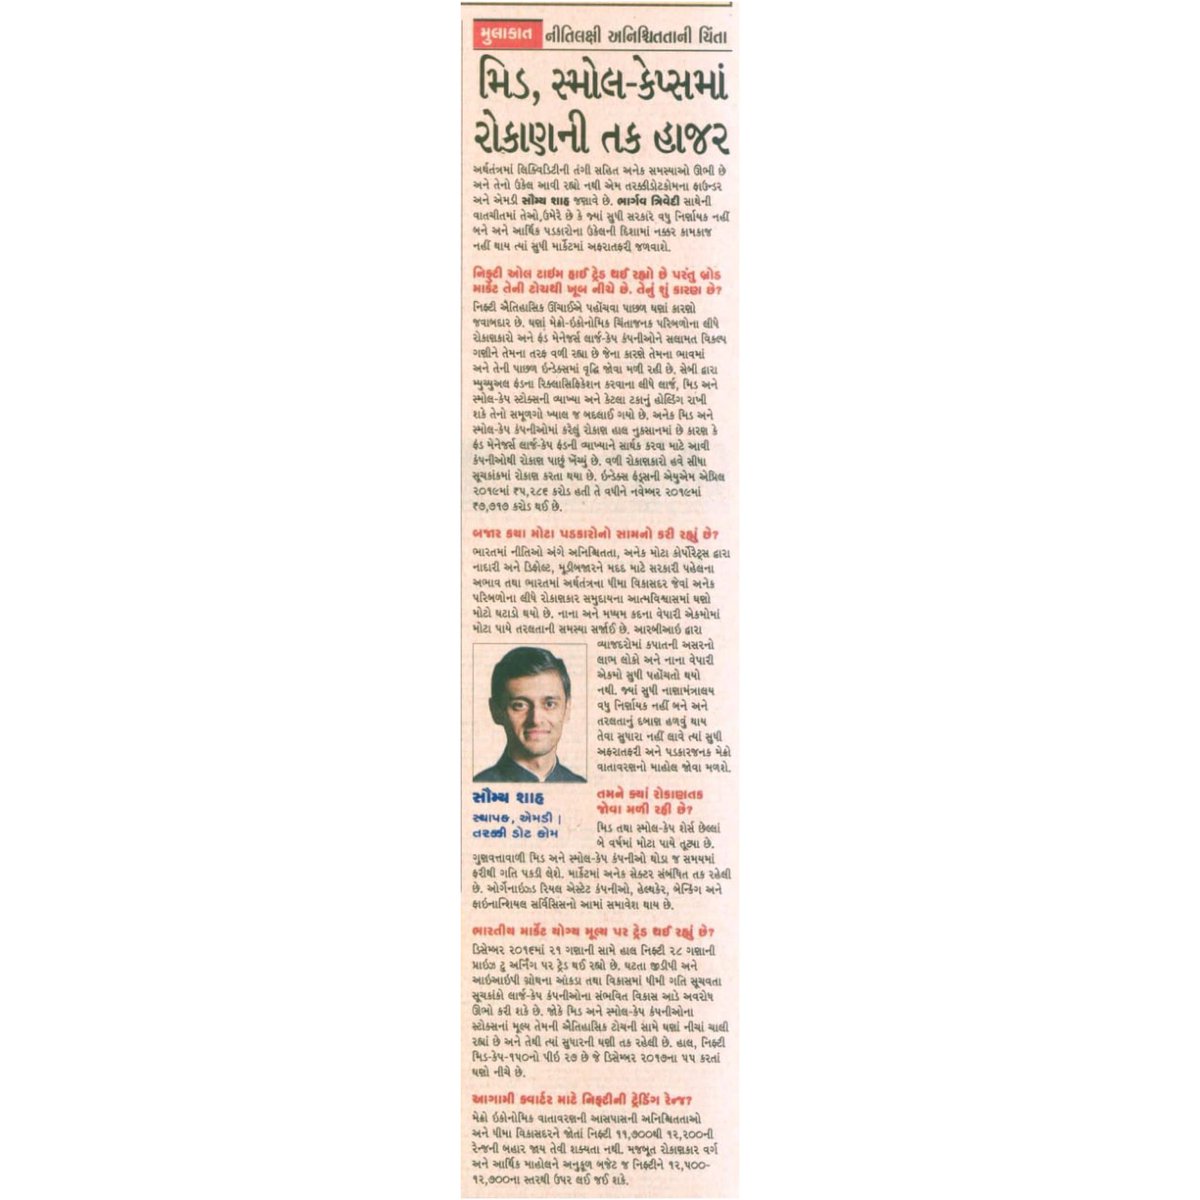 Tarrakki's founder @saumyashah6 was featured in today's Economic times (gujarati) edition. The article talks about his views on the markets and investment opportunites. Do check page 10 of today's Economic times - Gujarati version.

#newspaperarticle #marketviews #economictimes